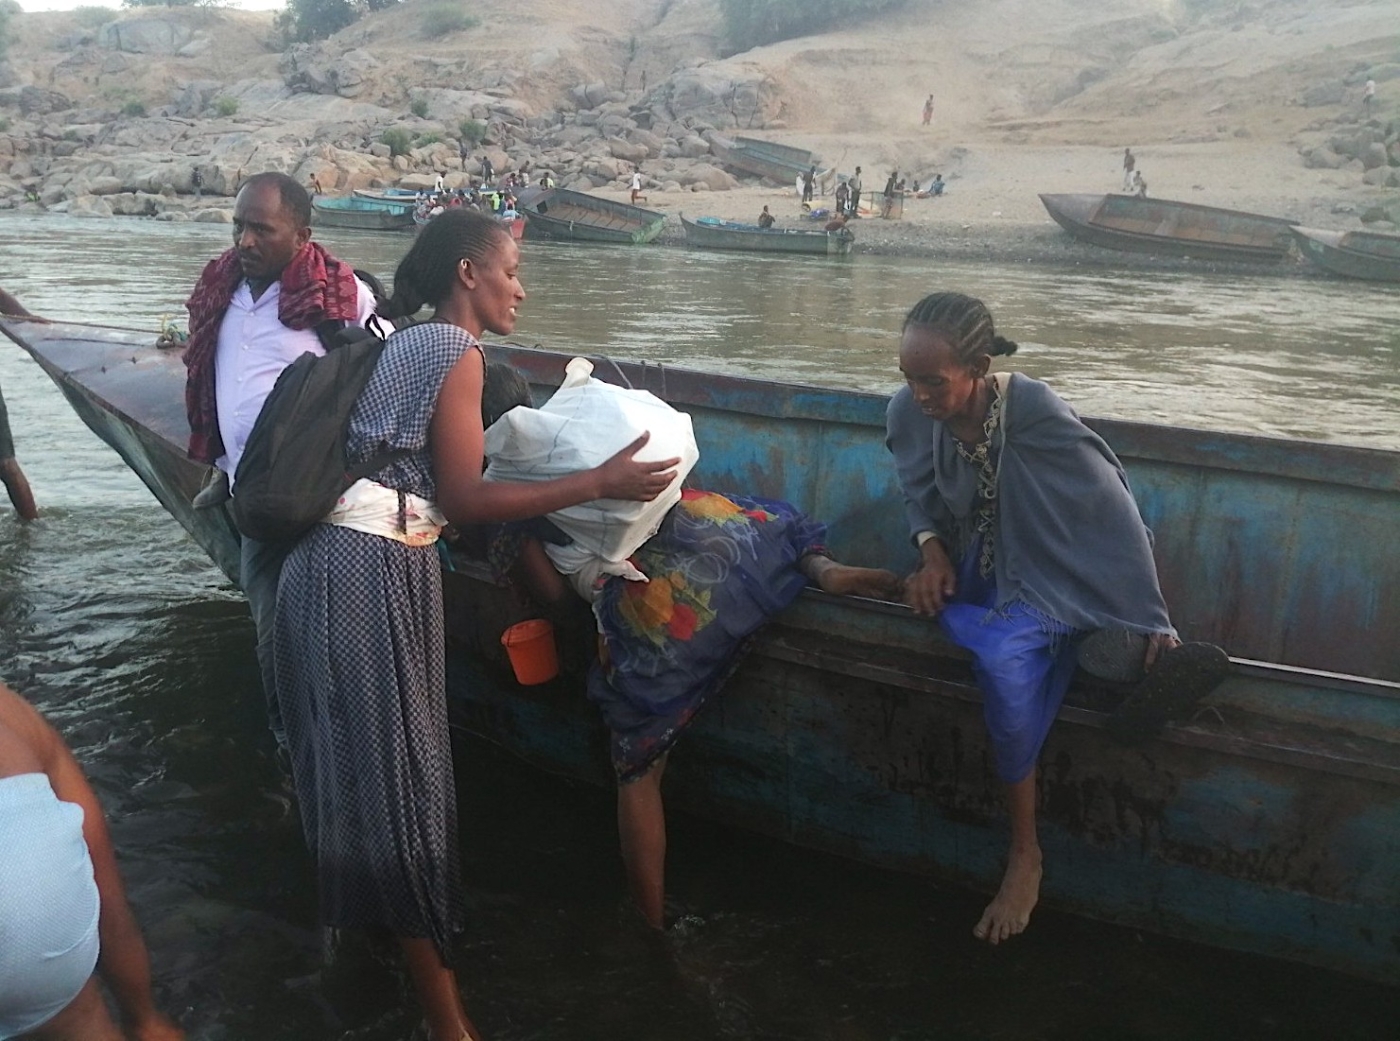 Ethiopian refugees arrive by boat into Sudan